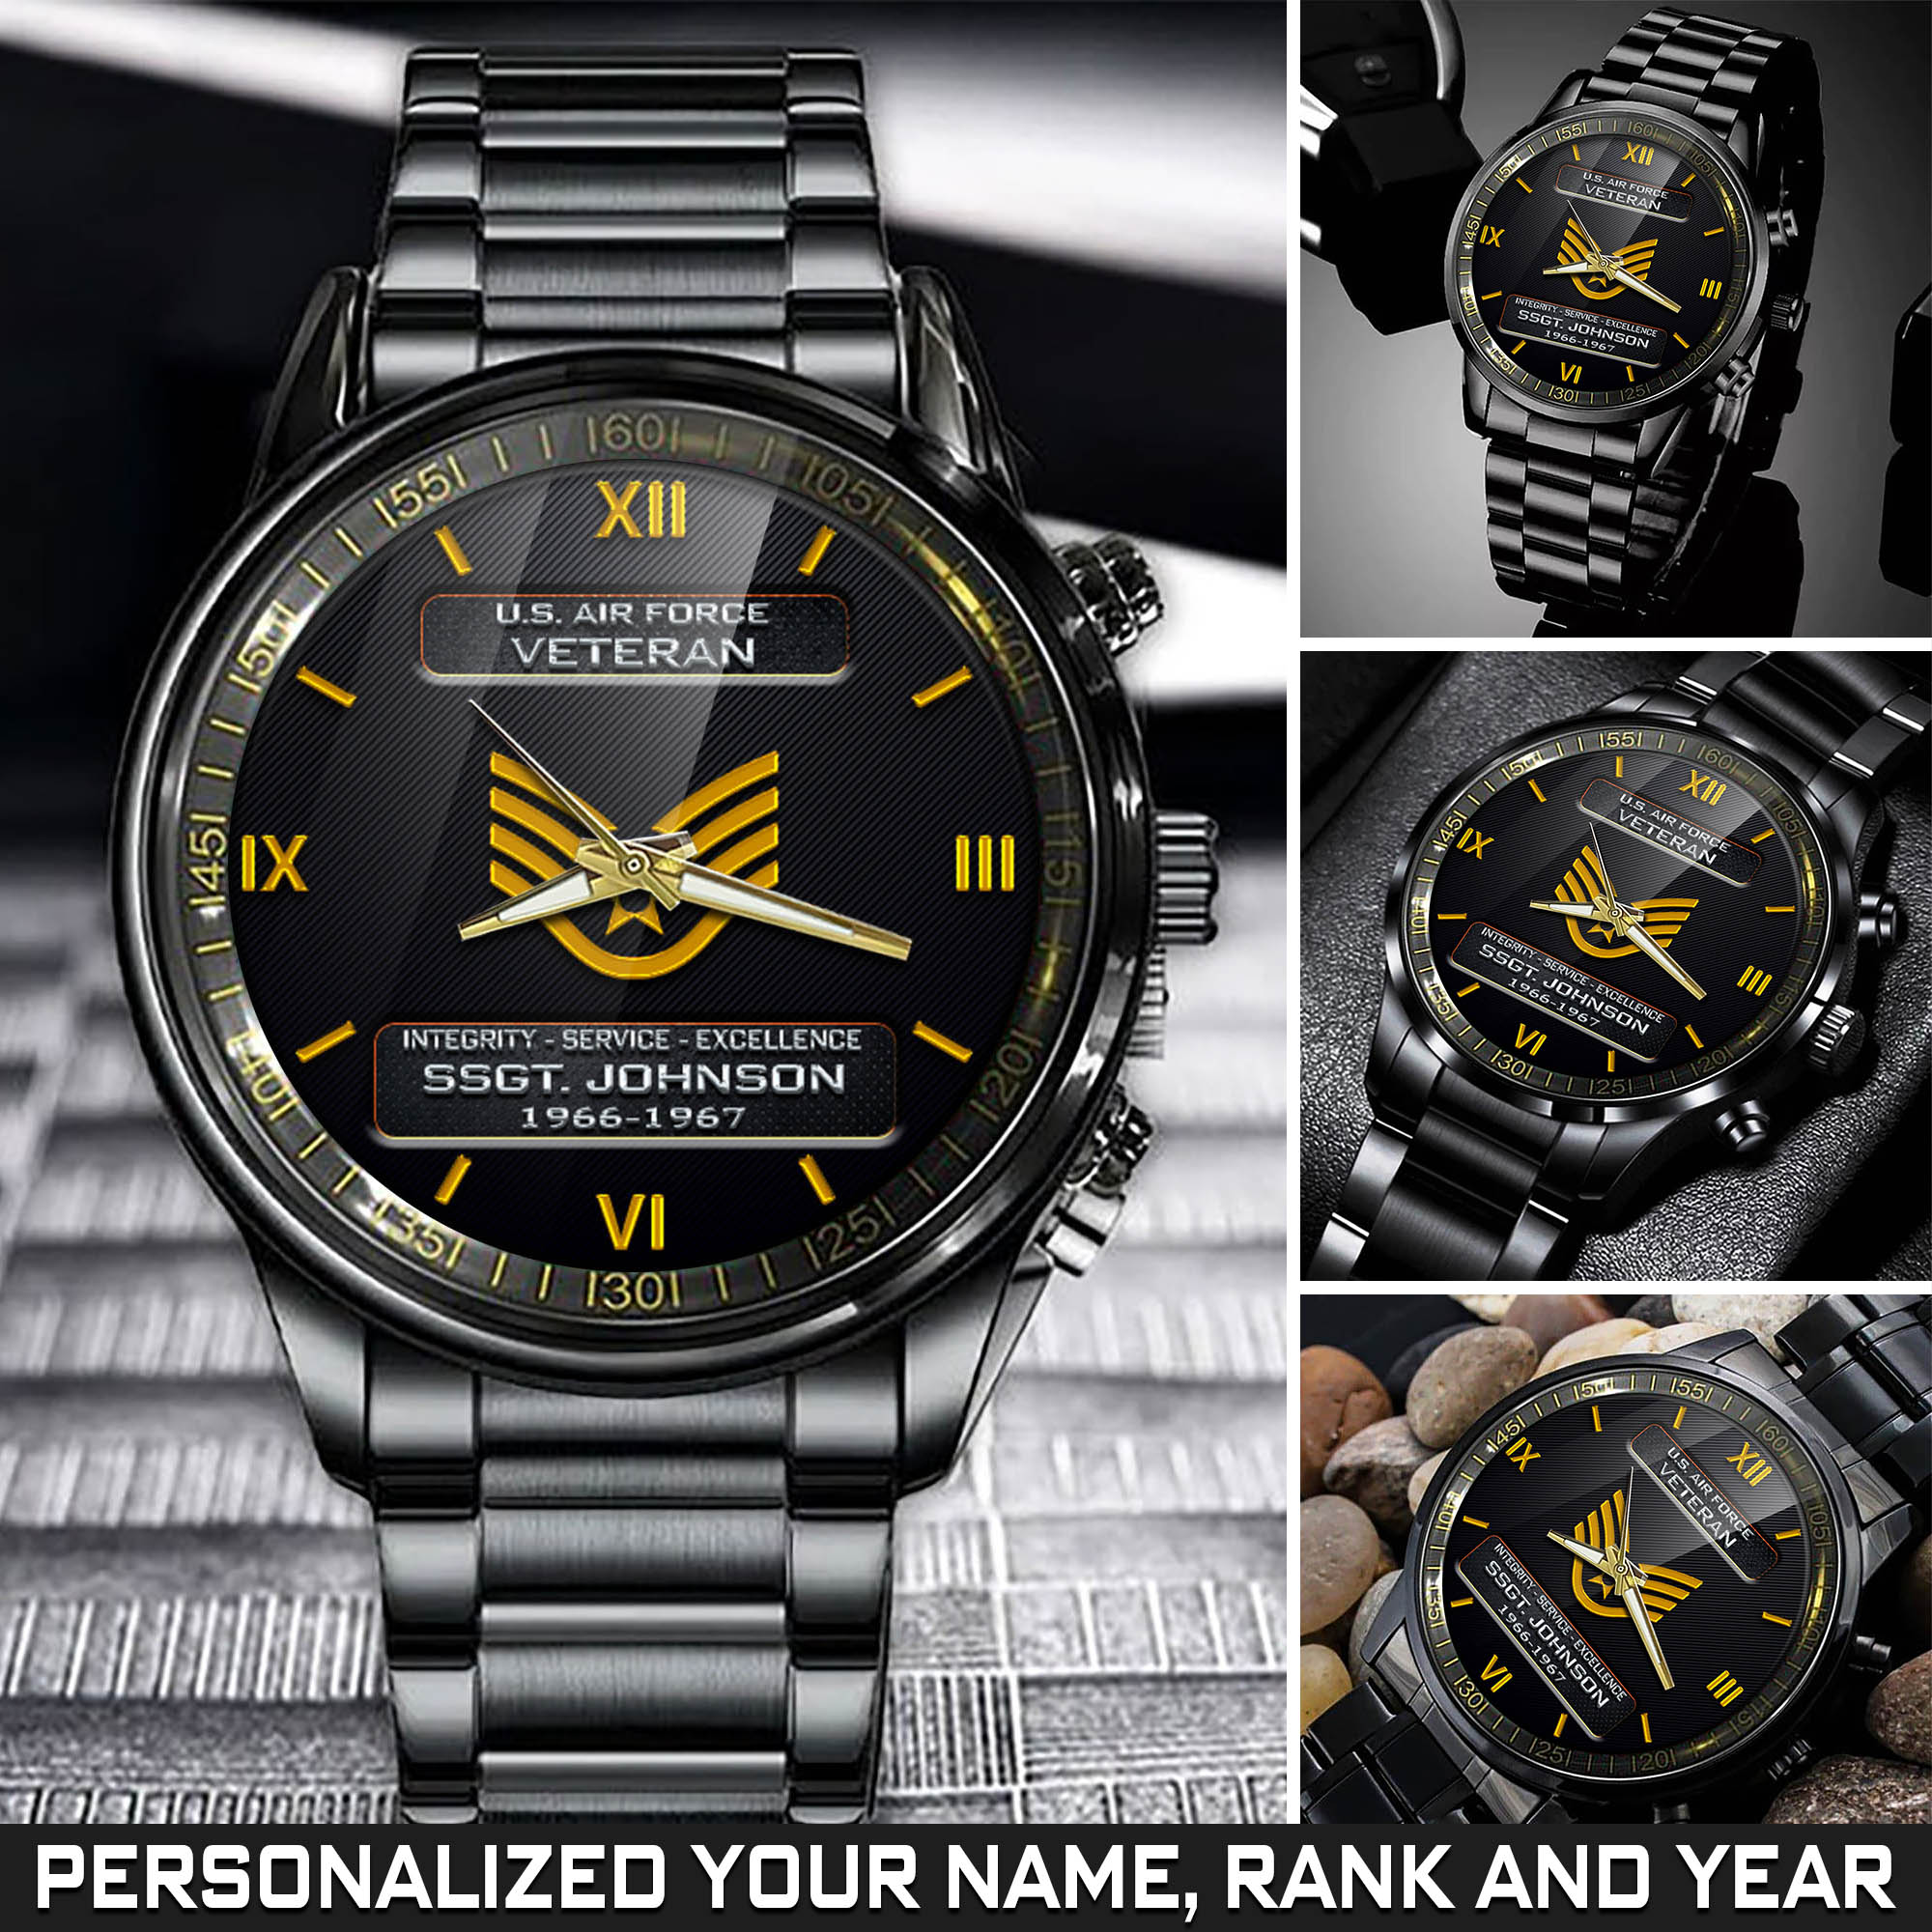 Personalized U.S. Air Force Veteran Black Fashion Watch With Your Name, Year And Rank, Military Watch For Veterans, Gift For Veterans ETHY-57684